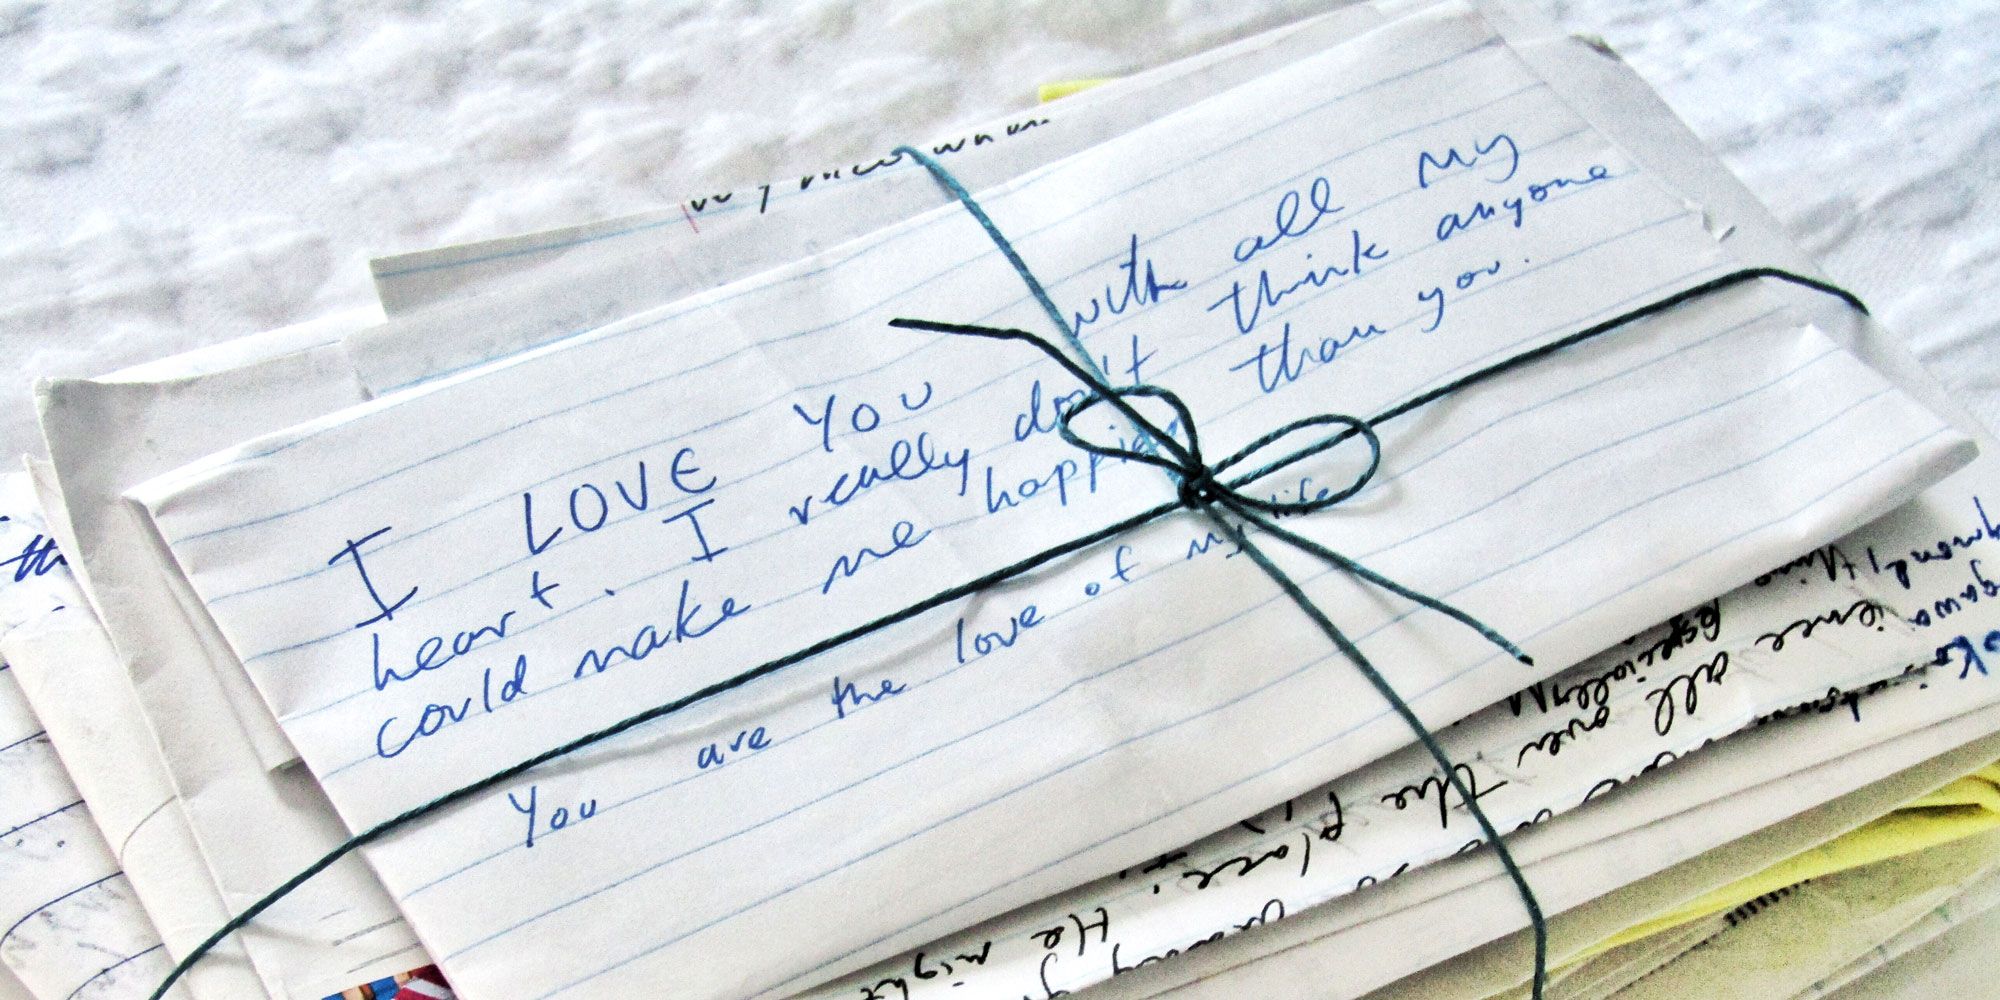 My Boyfriend Saved Love Letters From His Ex